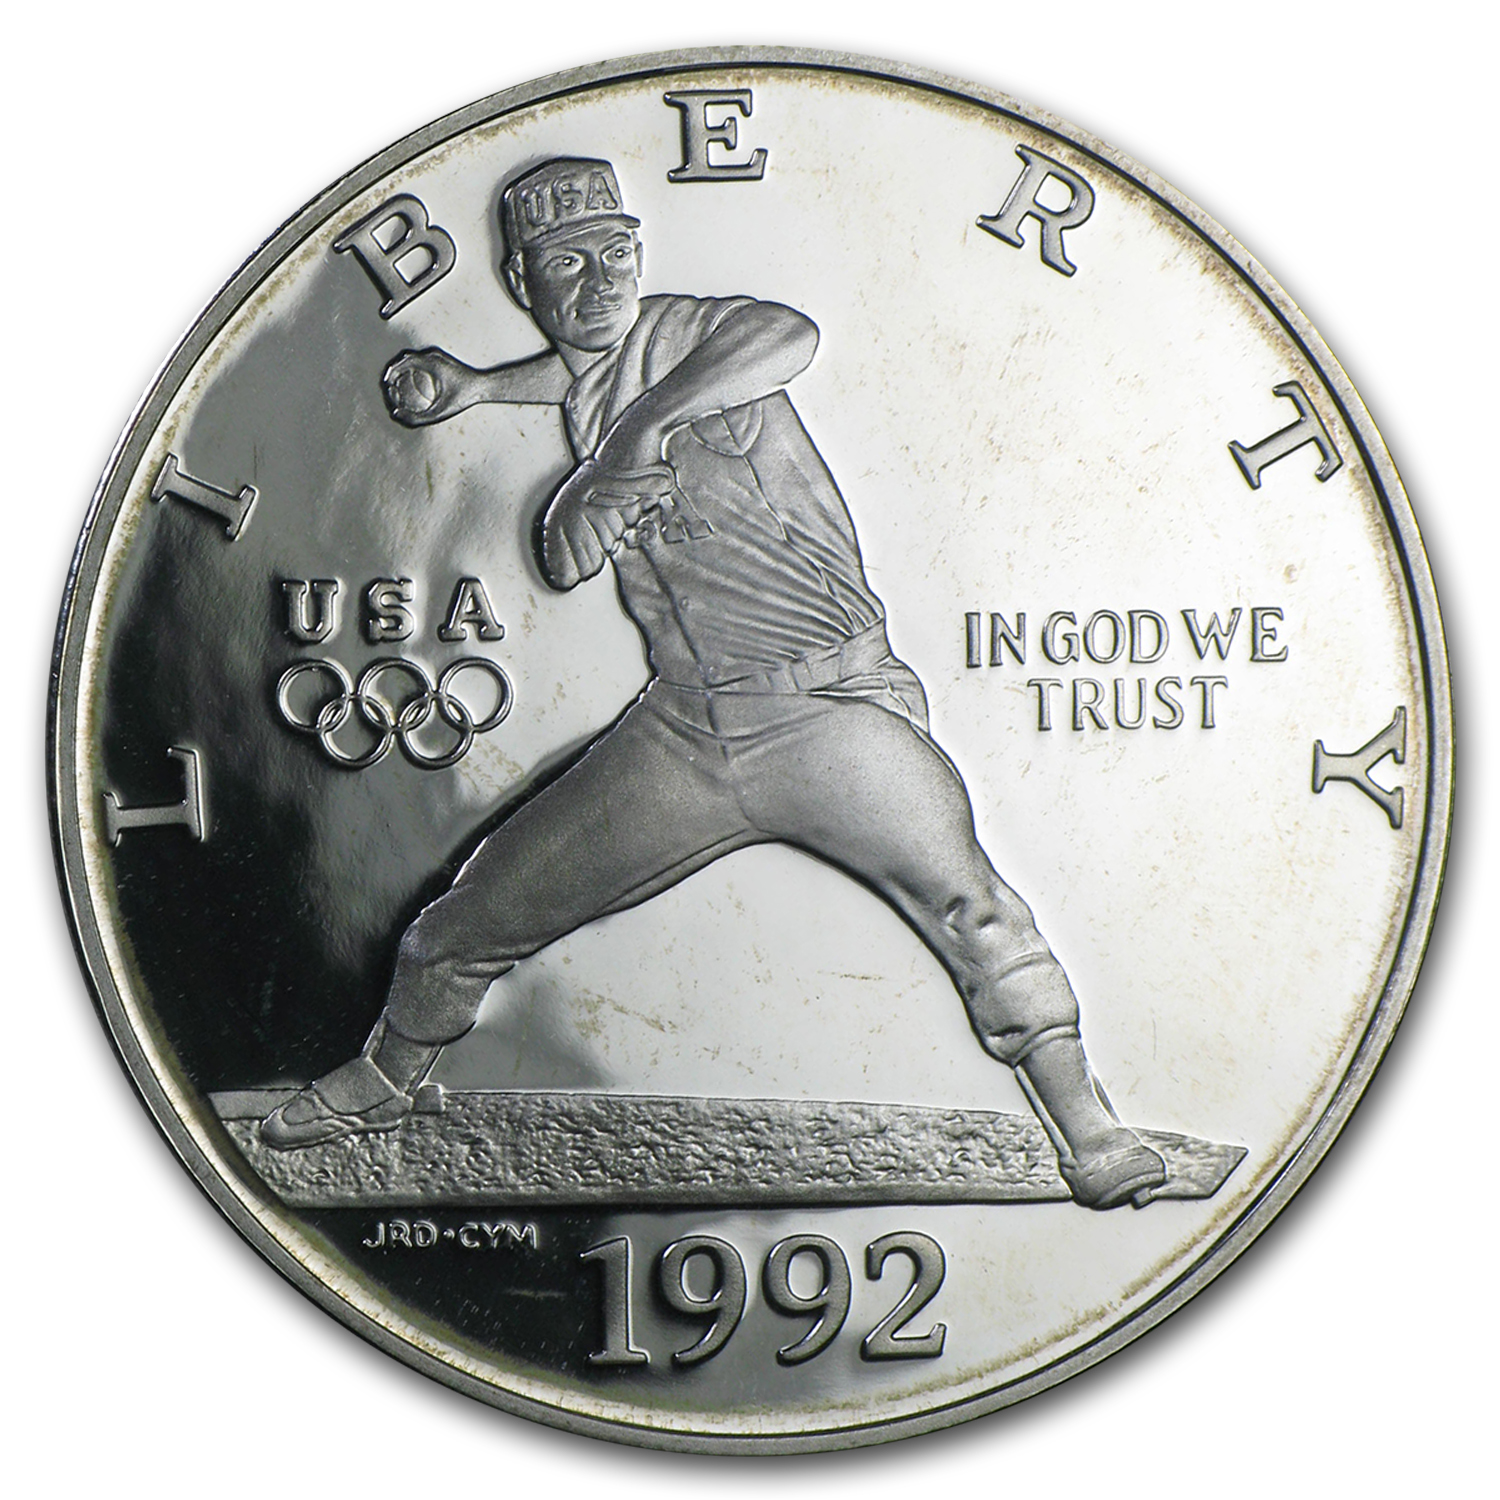 Buy 1992-S Olympic Baseball $1 Silver Commem Proof (Capsule only)